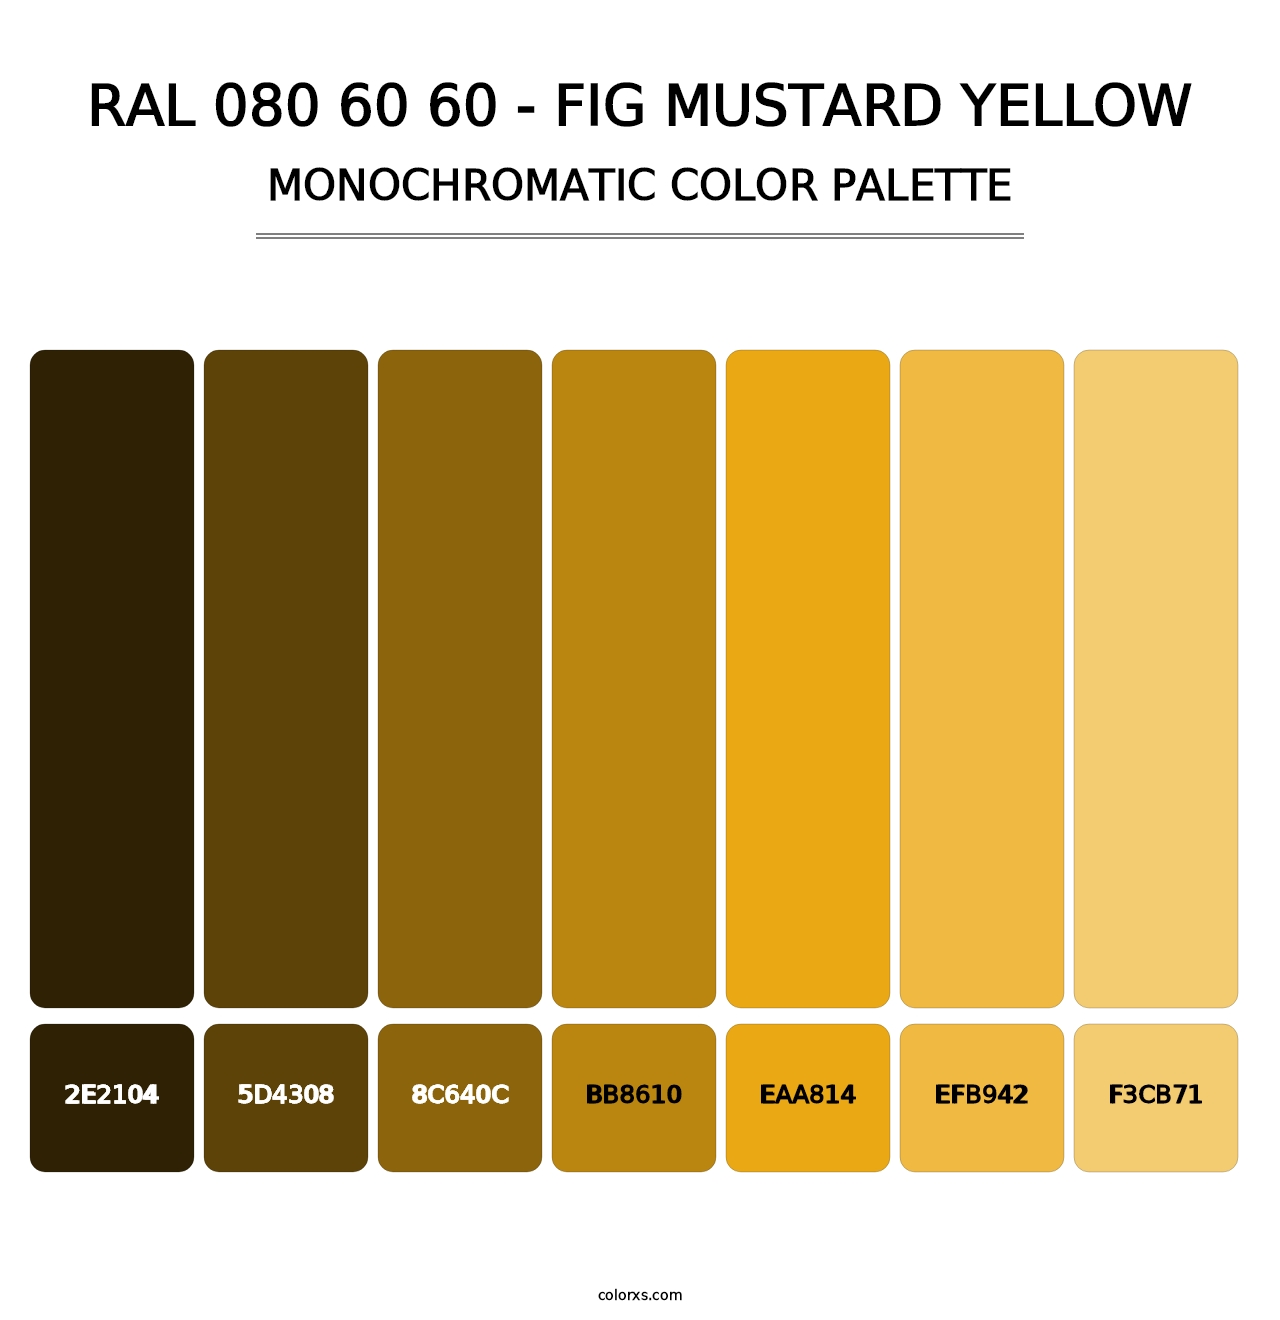 RAL 080 60 60 - Fig Mustard Yellow - Monochromatic Color Palette